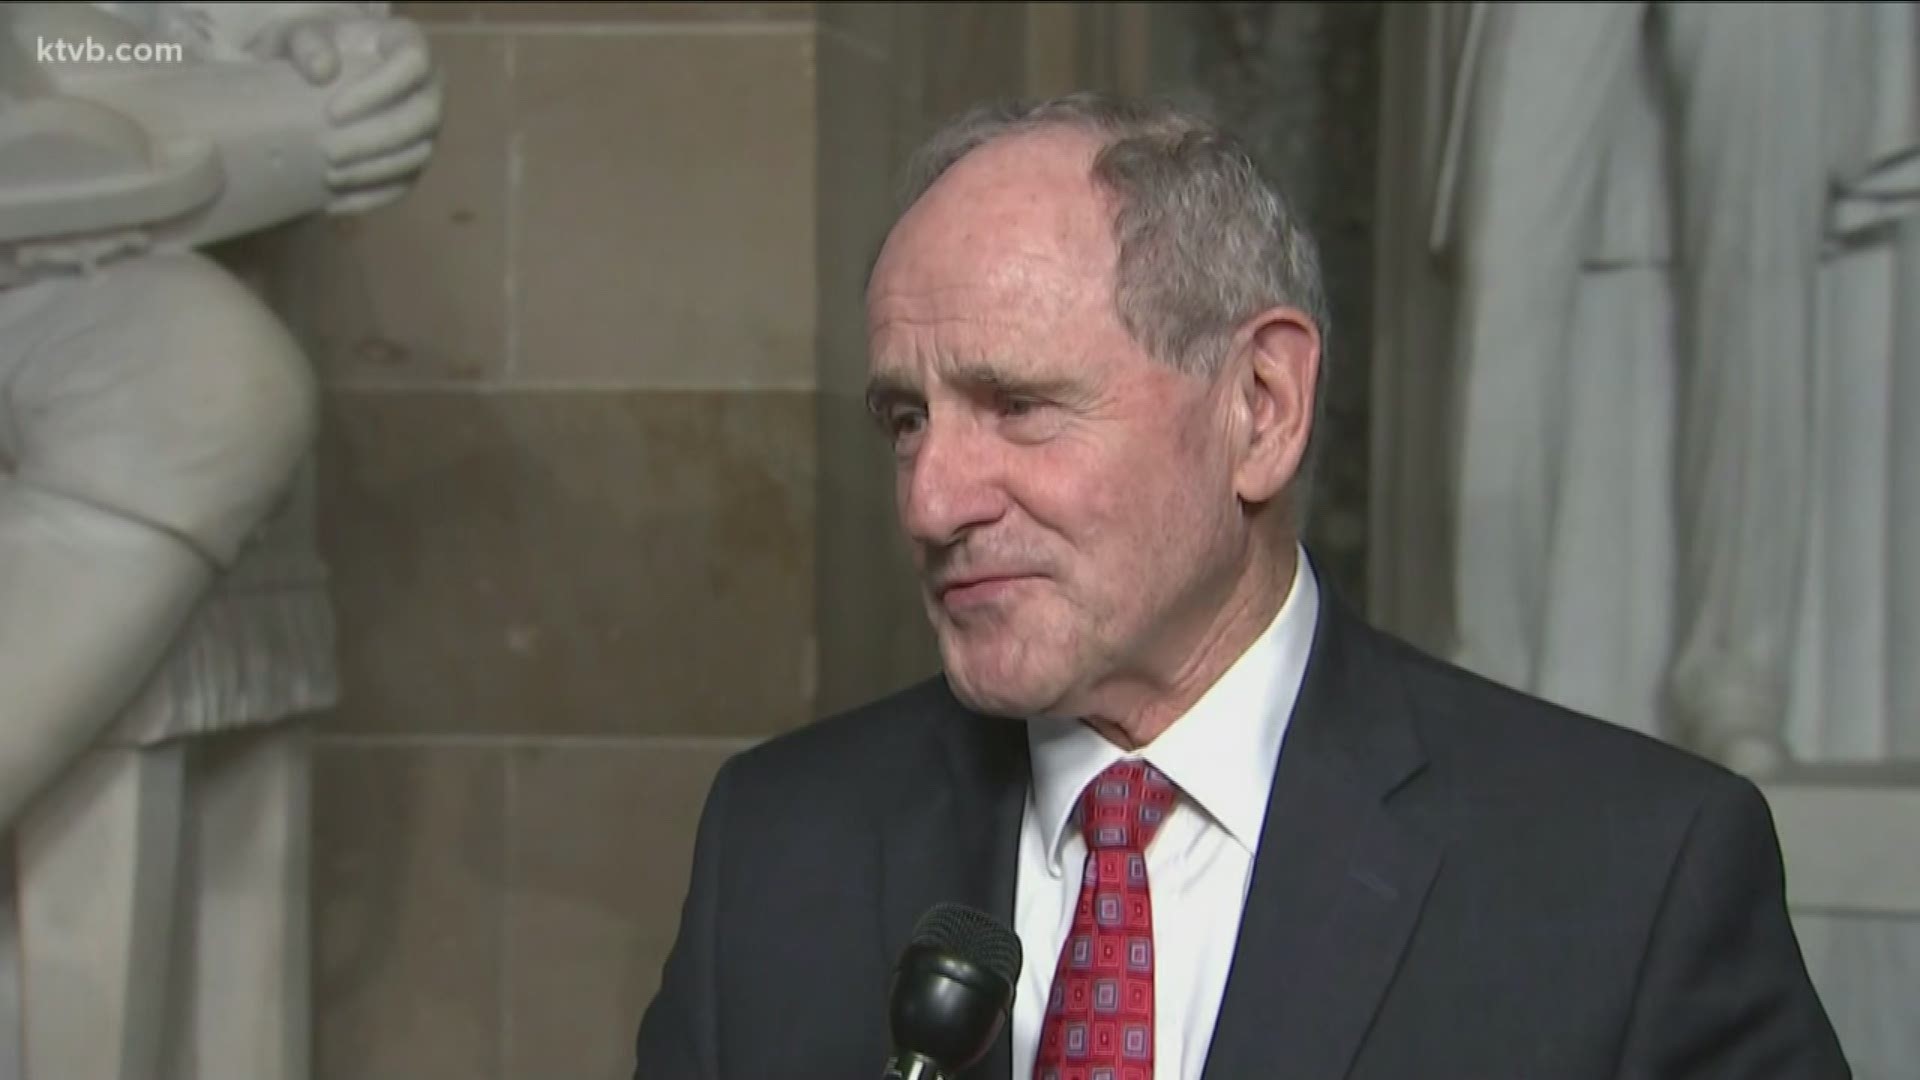 Senators Mike Crapo and Jim Risch, and Reps. Mike Simpson and Russ Fulcher weighed in after the president's speech.